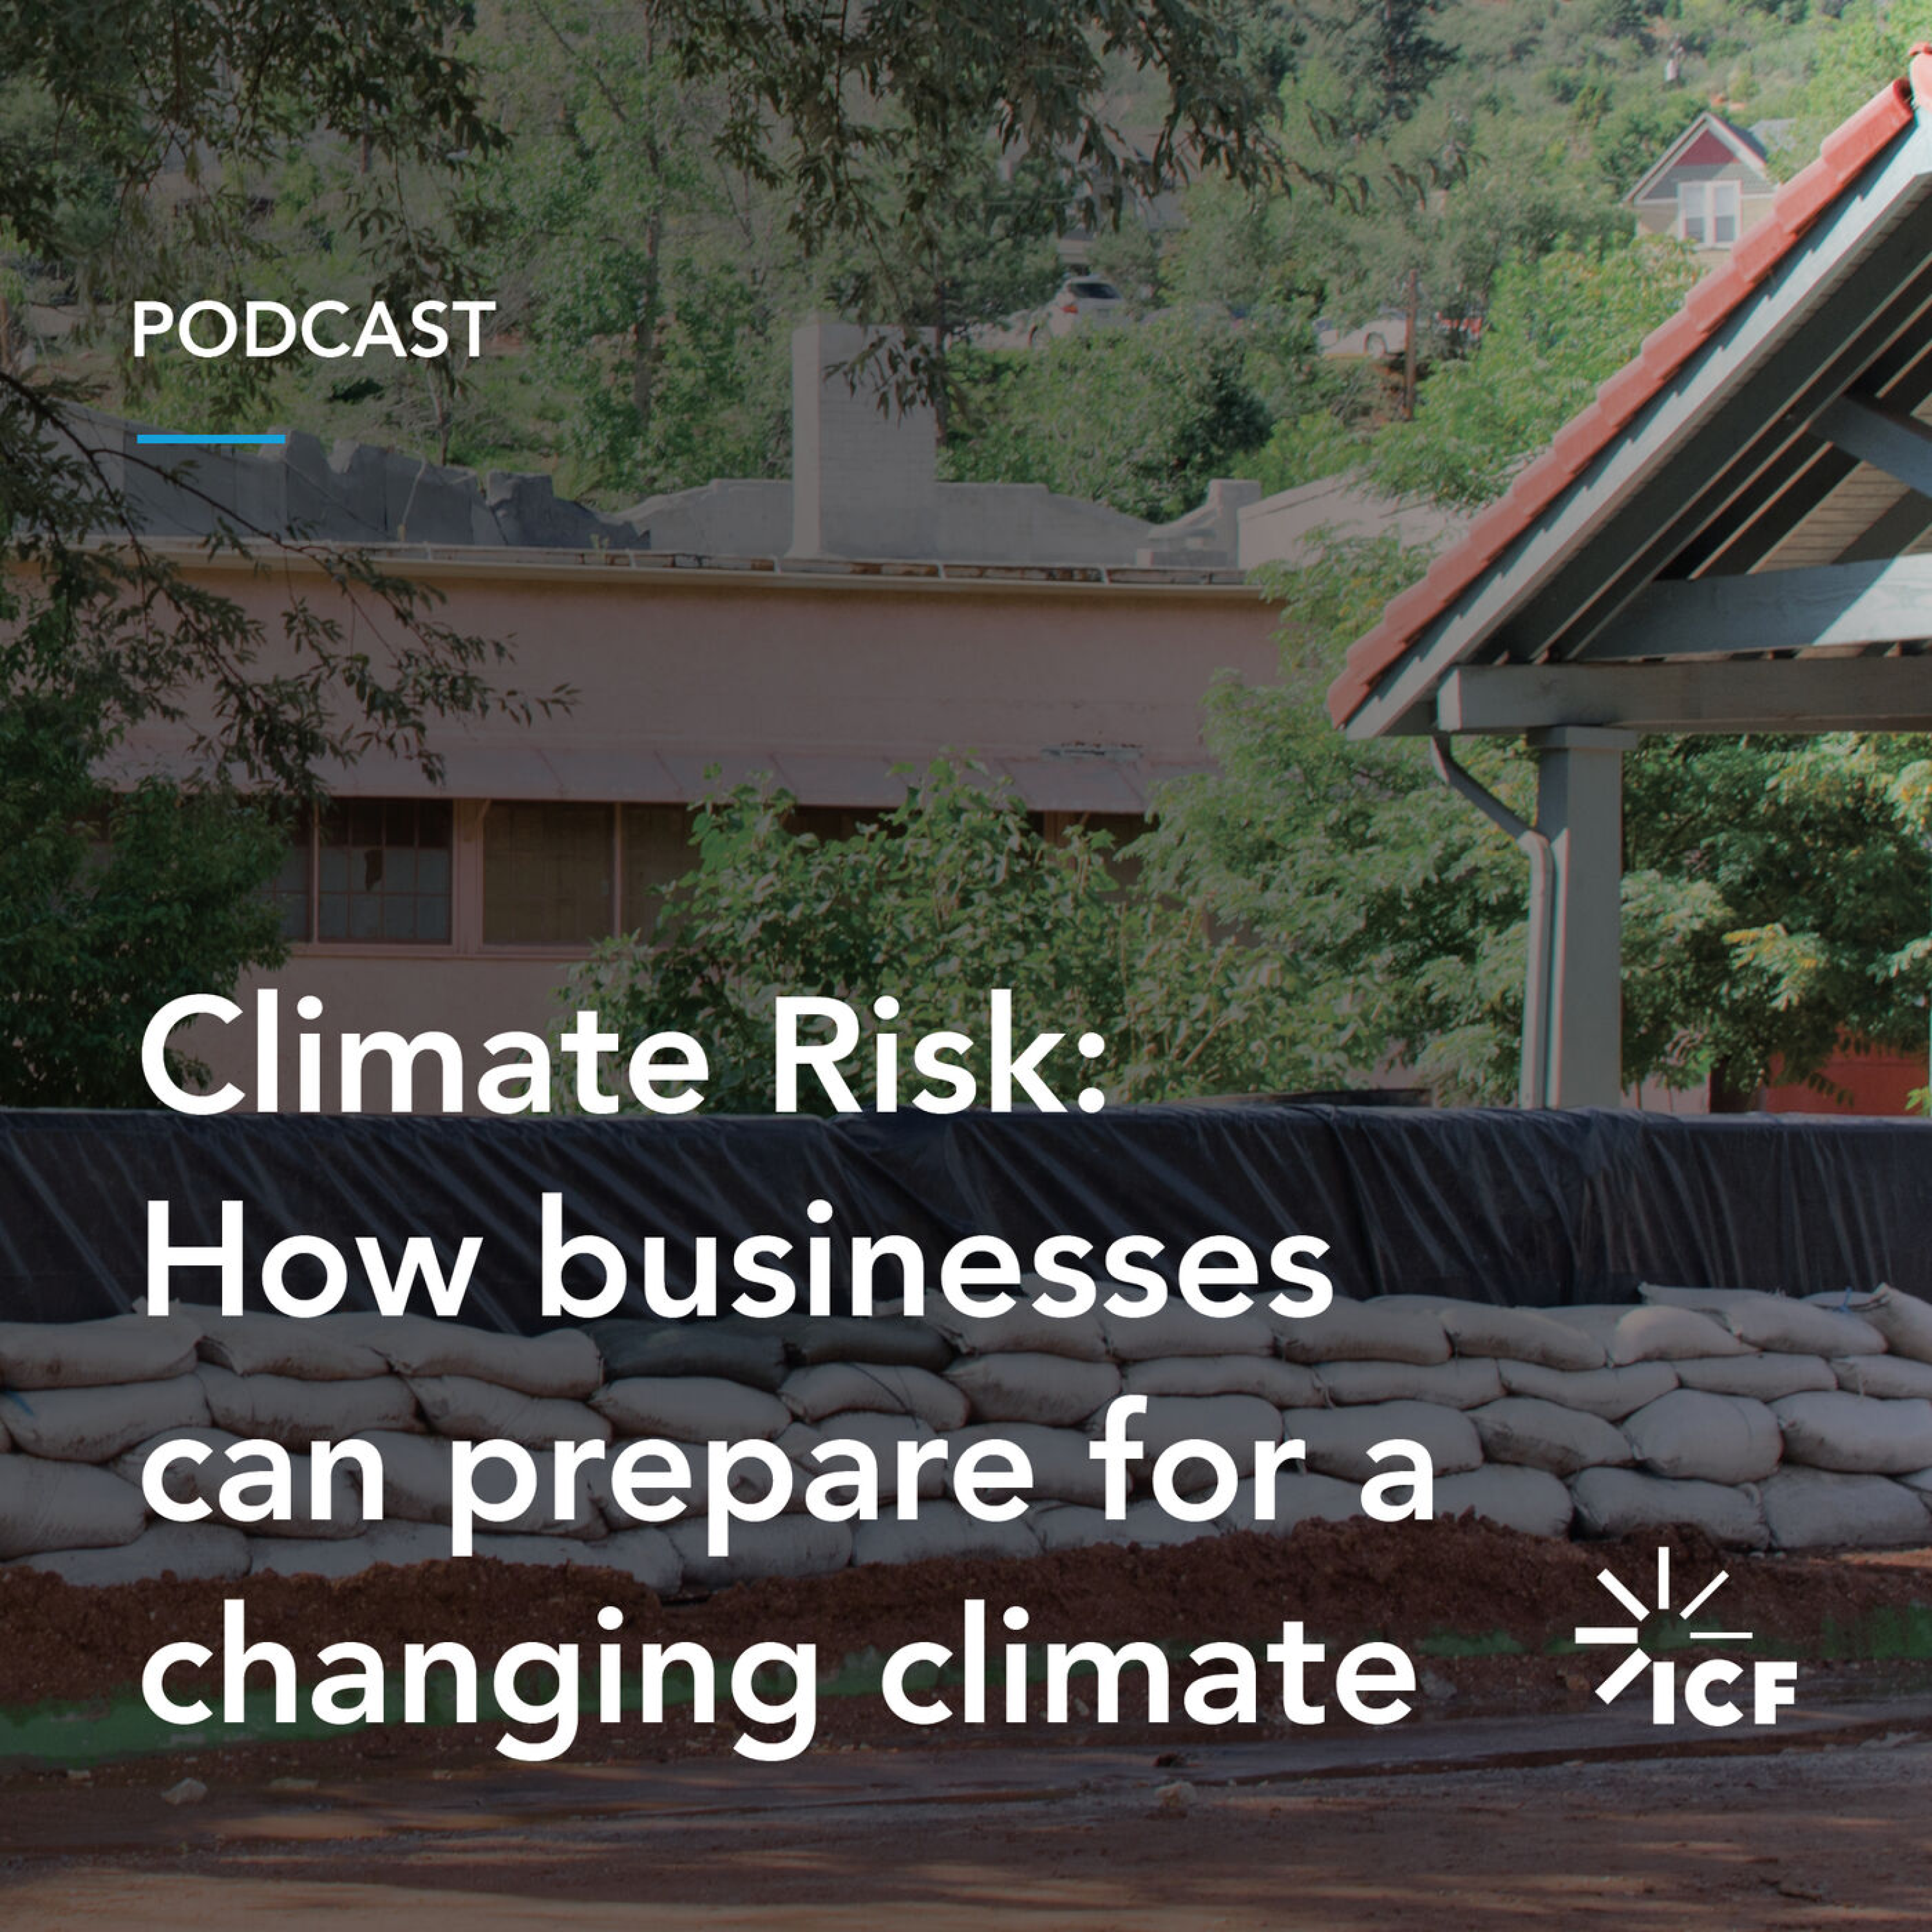 Climate Risk: How businesses can prepare for a changing climate